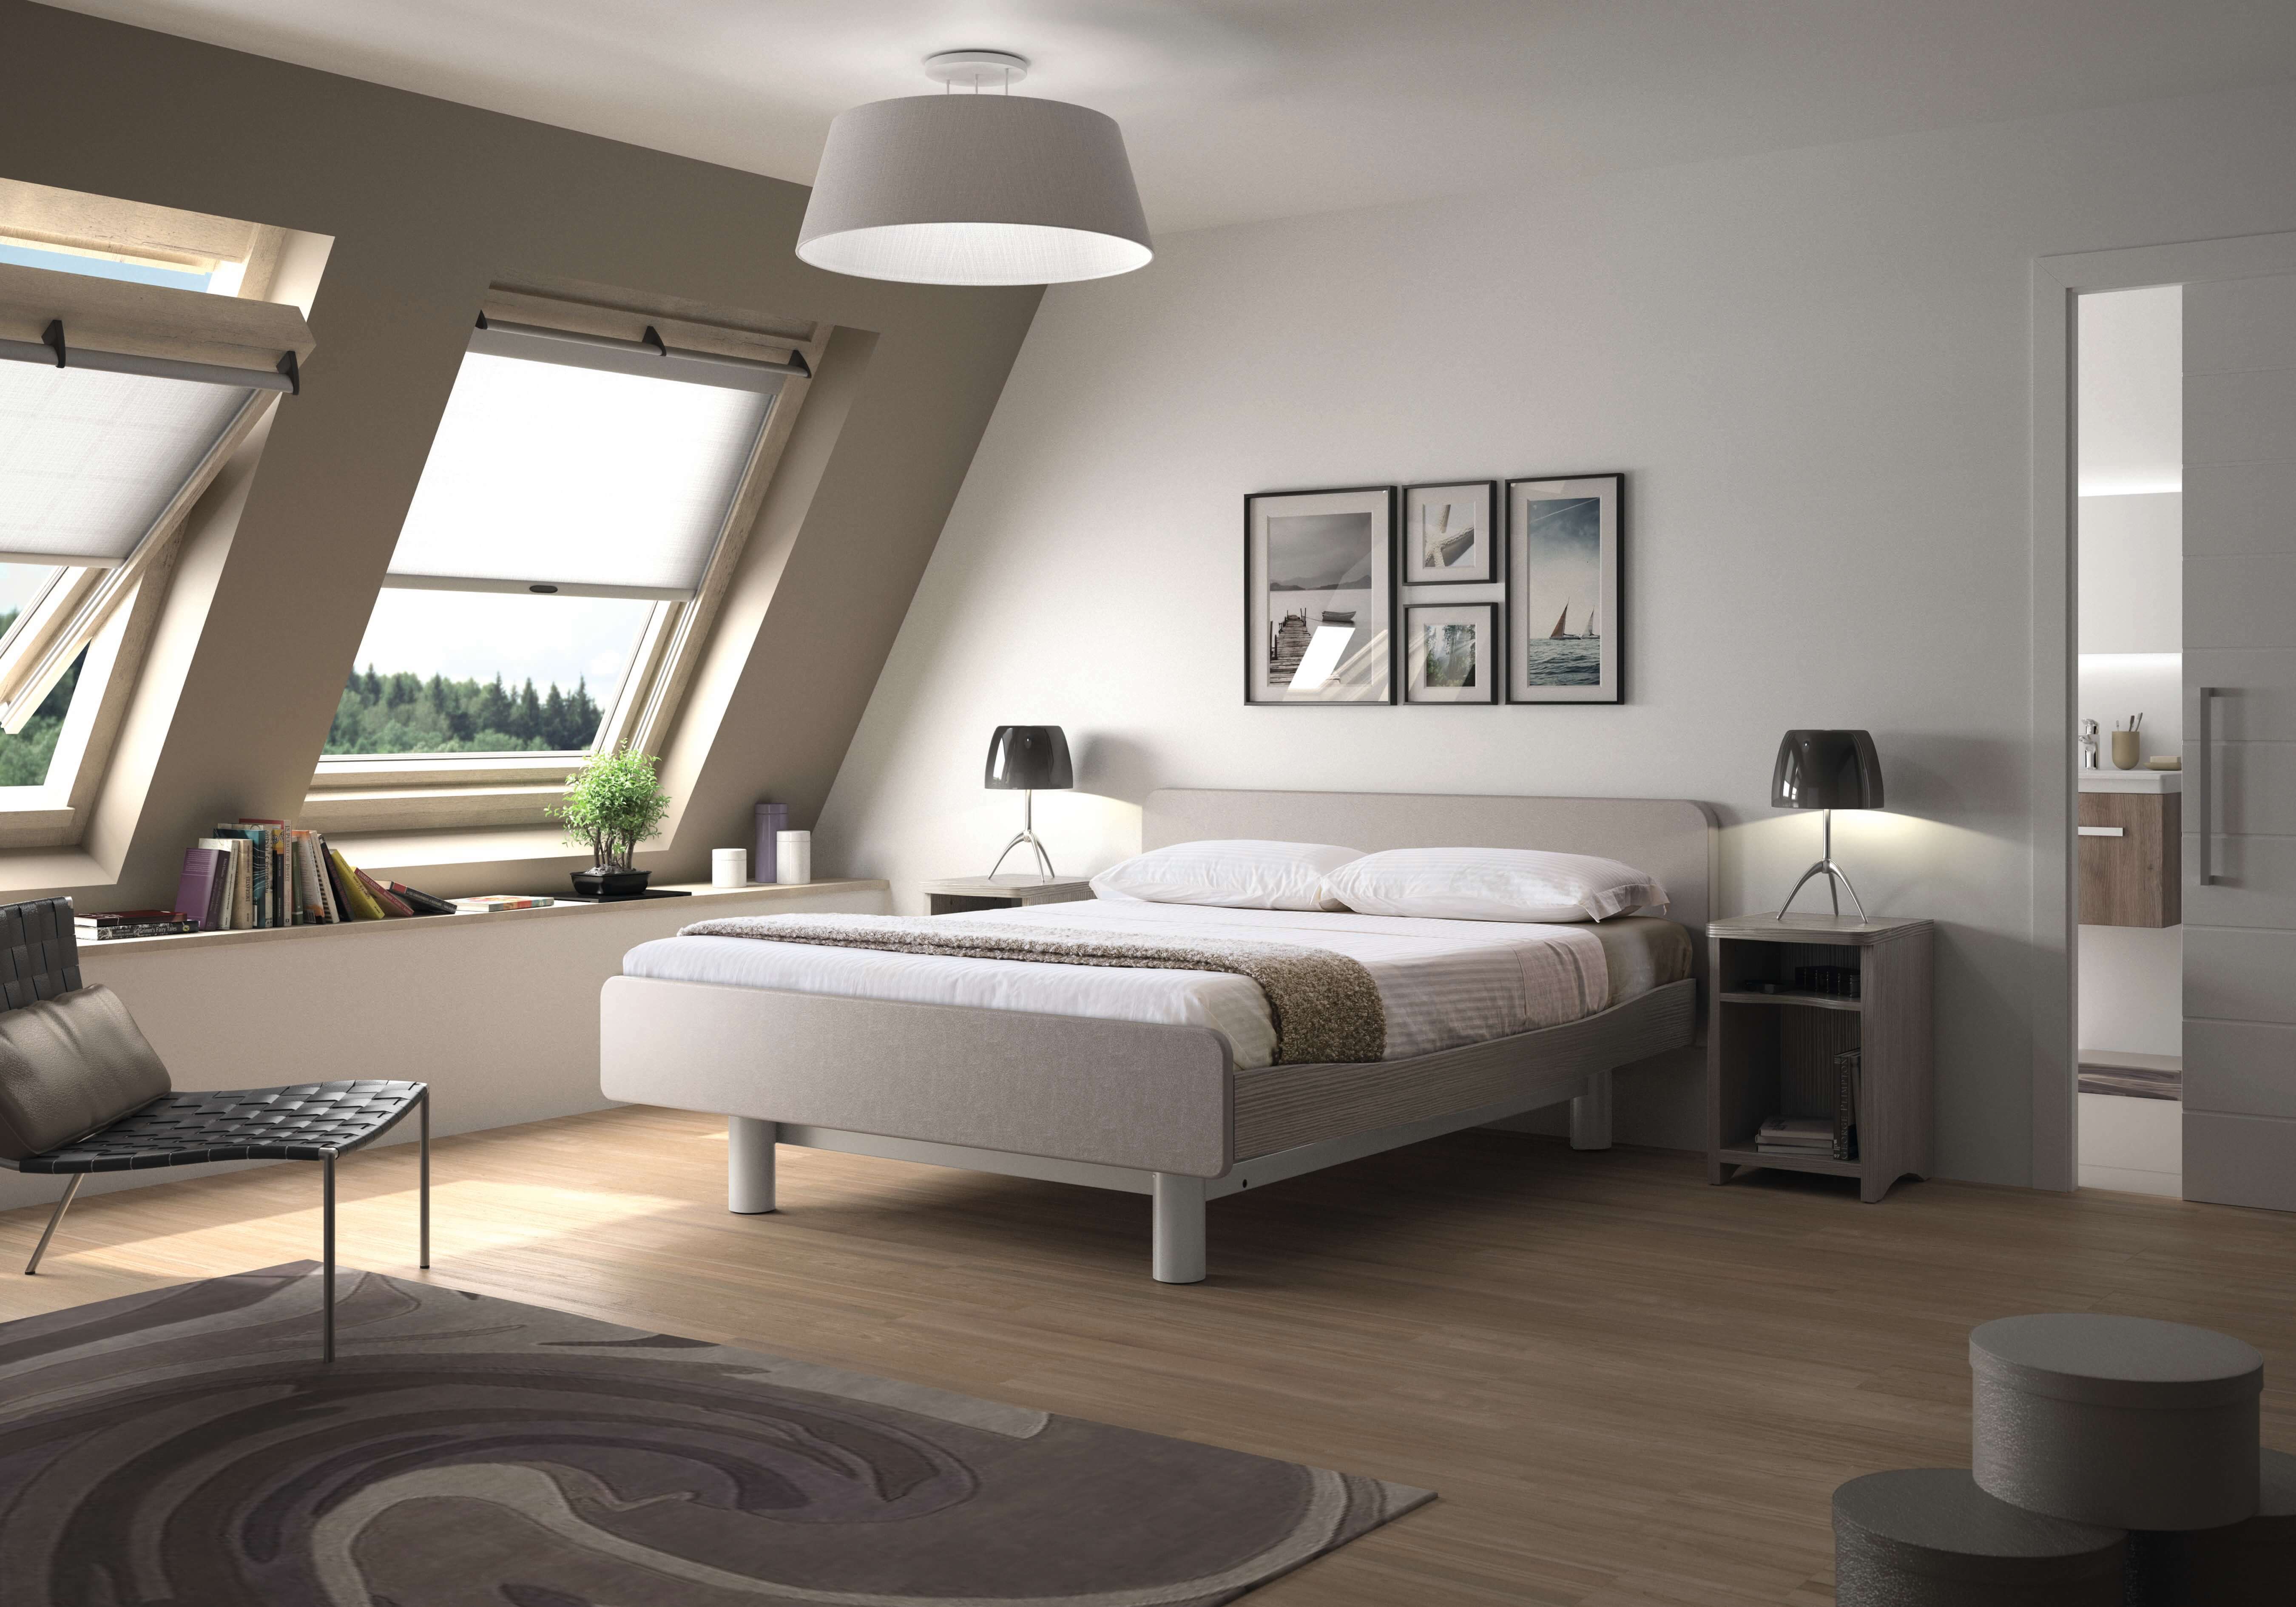 Image of a double-sized adjustable bed in a bedroom with open windows.